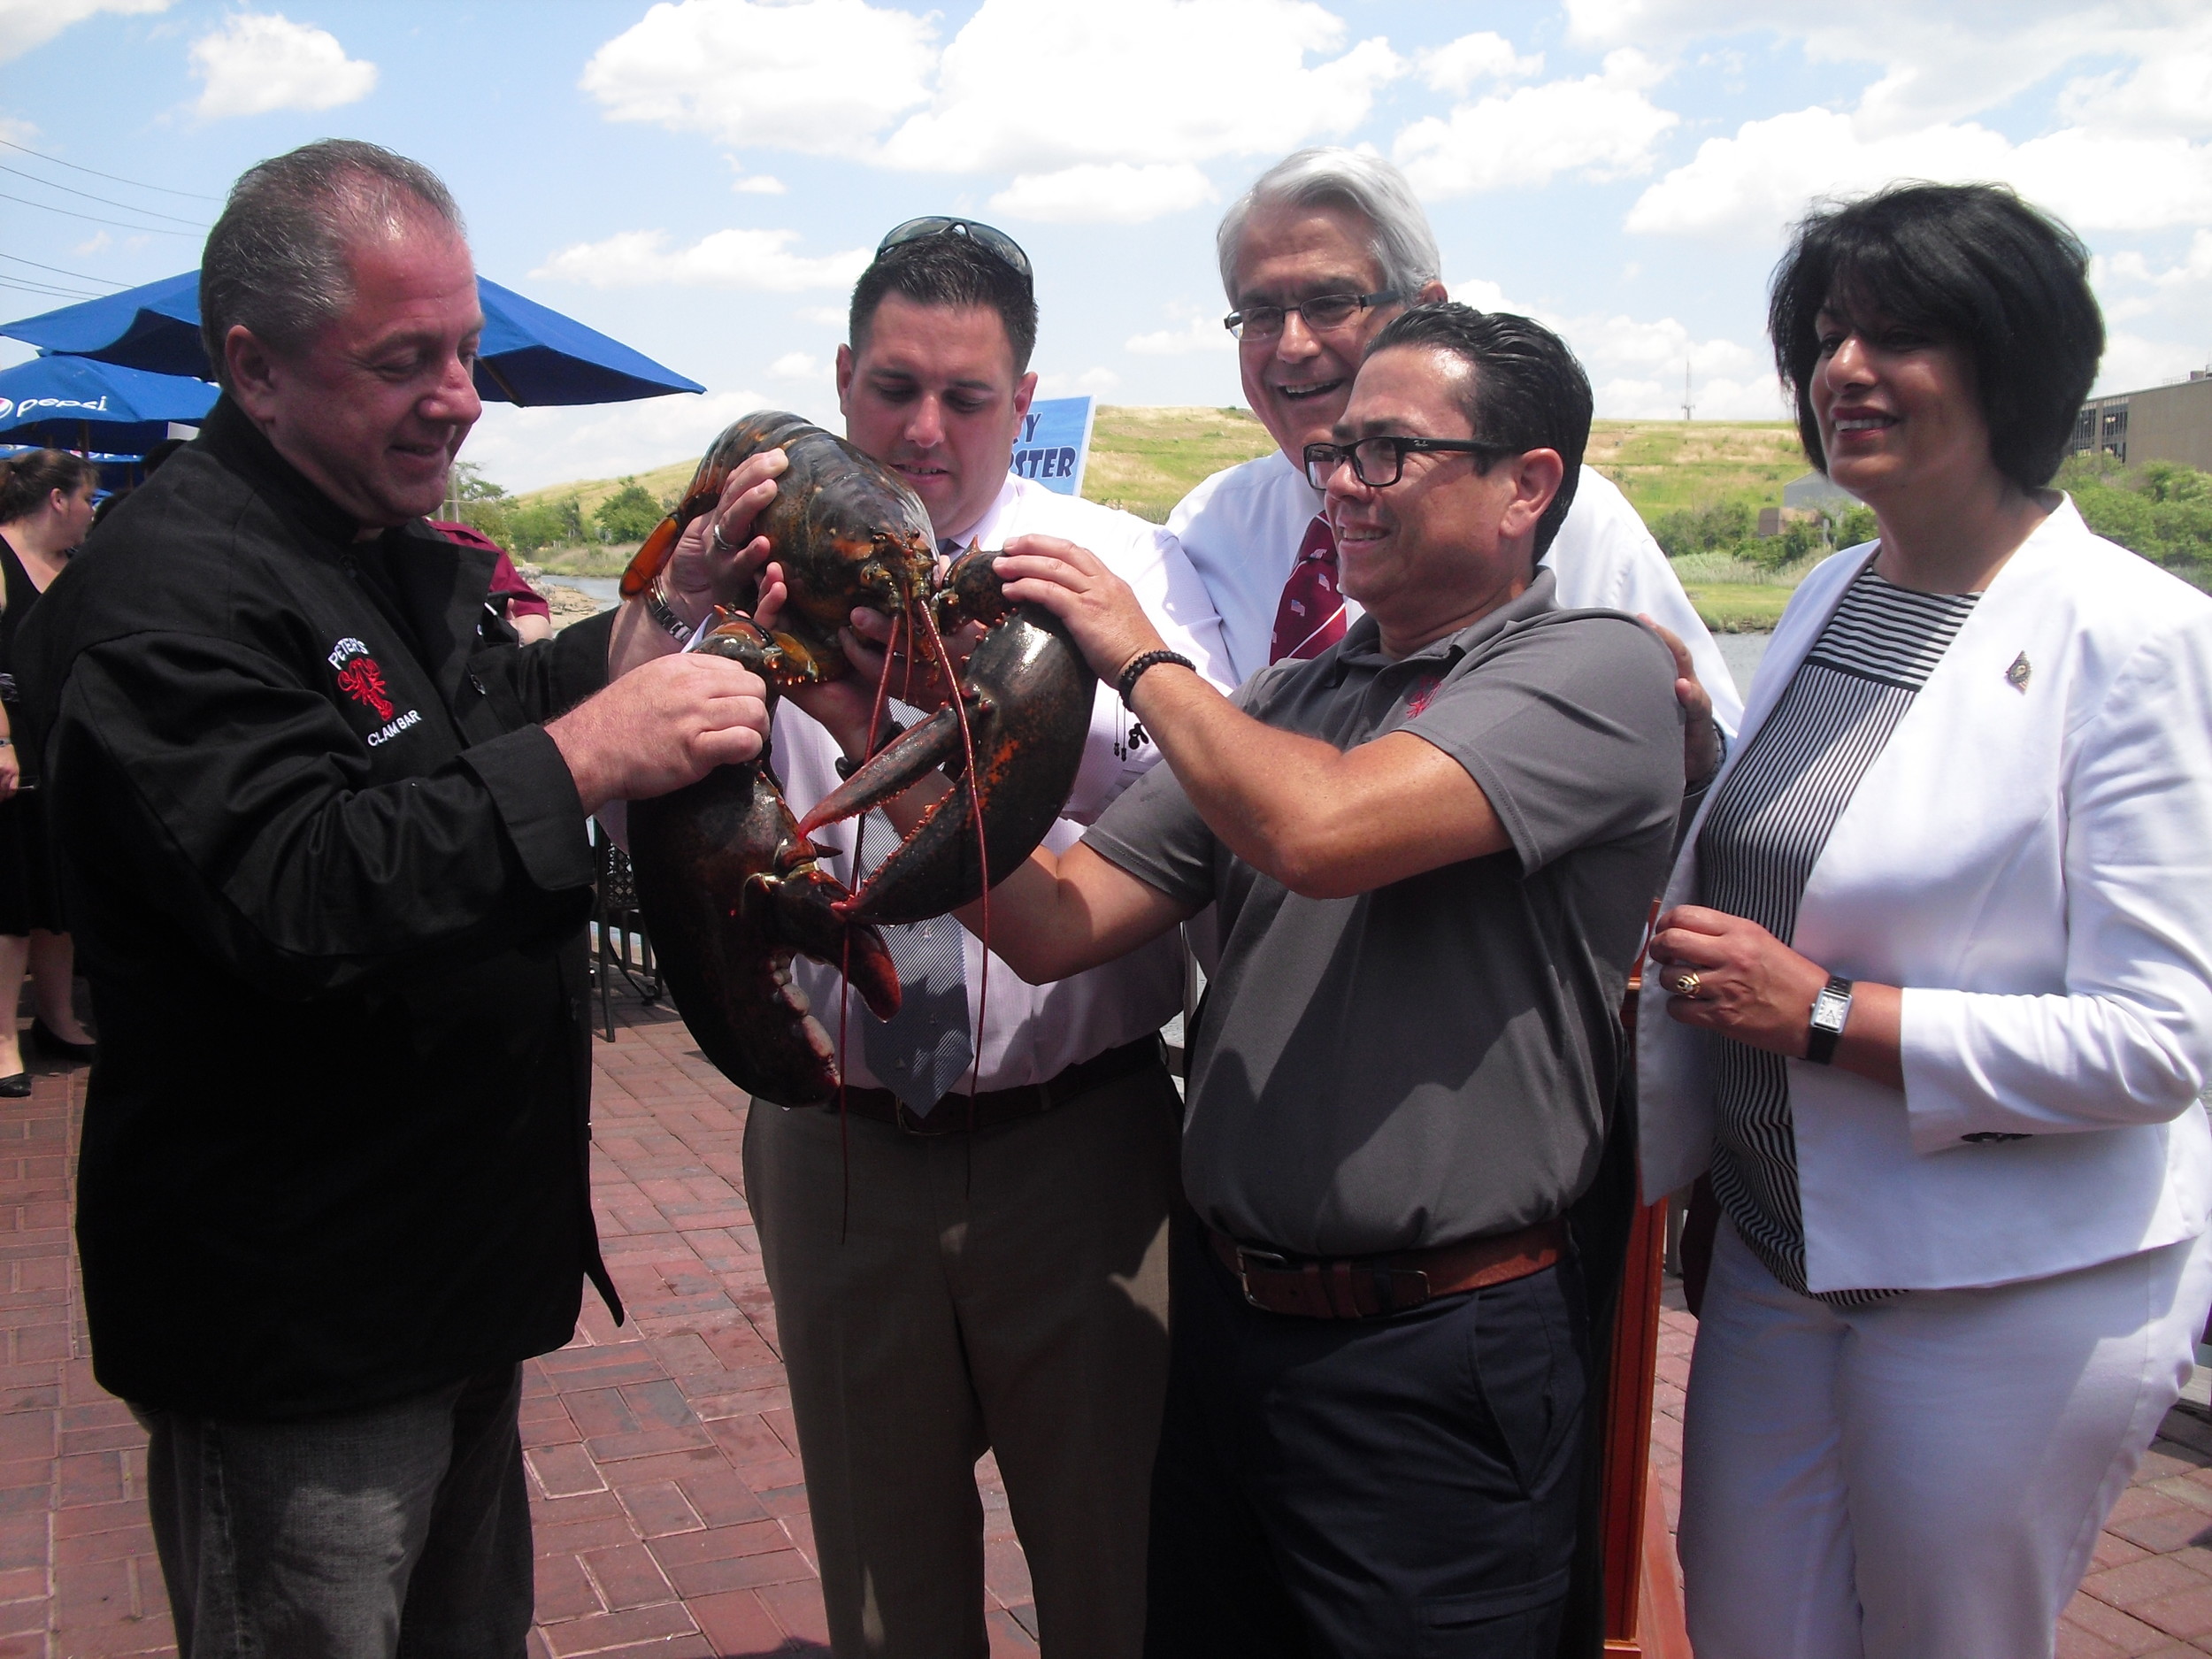 All eyes were on Larry the Lobster before his release. From left, Butch Yamali, Town Councilman Anthony D’Esposito, Supervisor Anthony Santino, Pepe Polblador and Town Clerk Nasrin Ahmad.